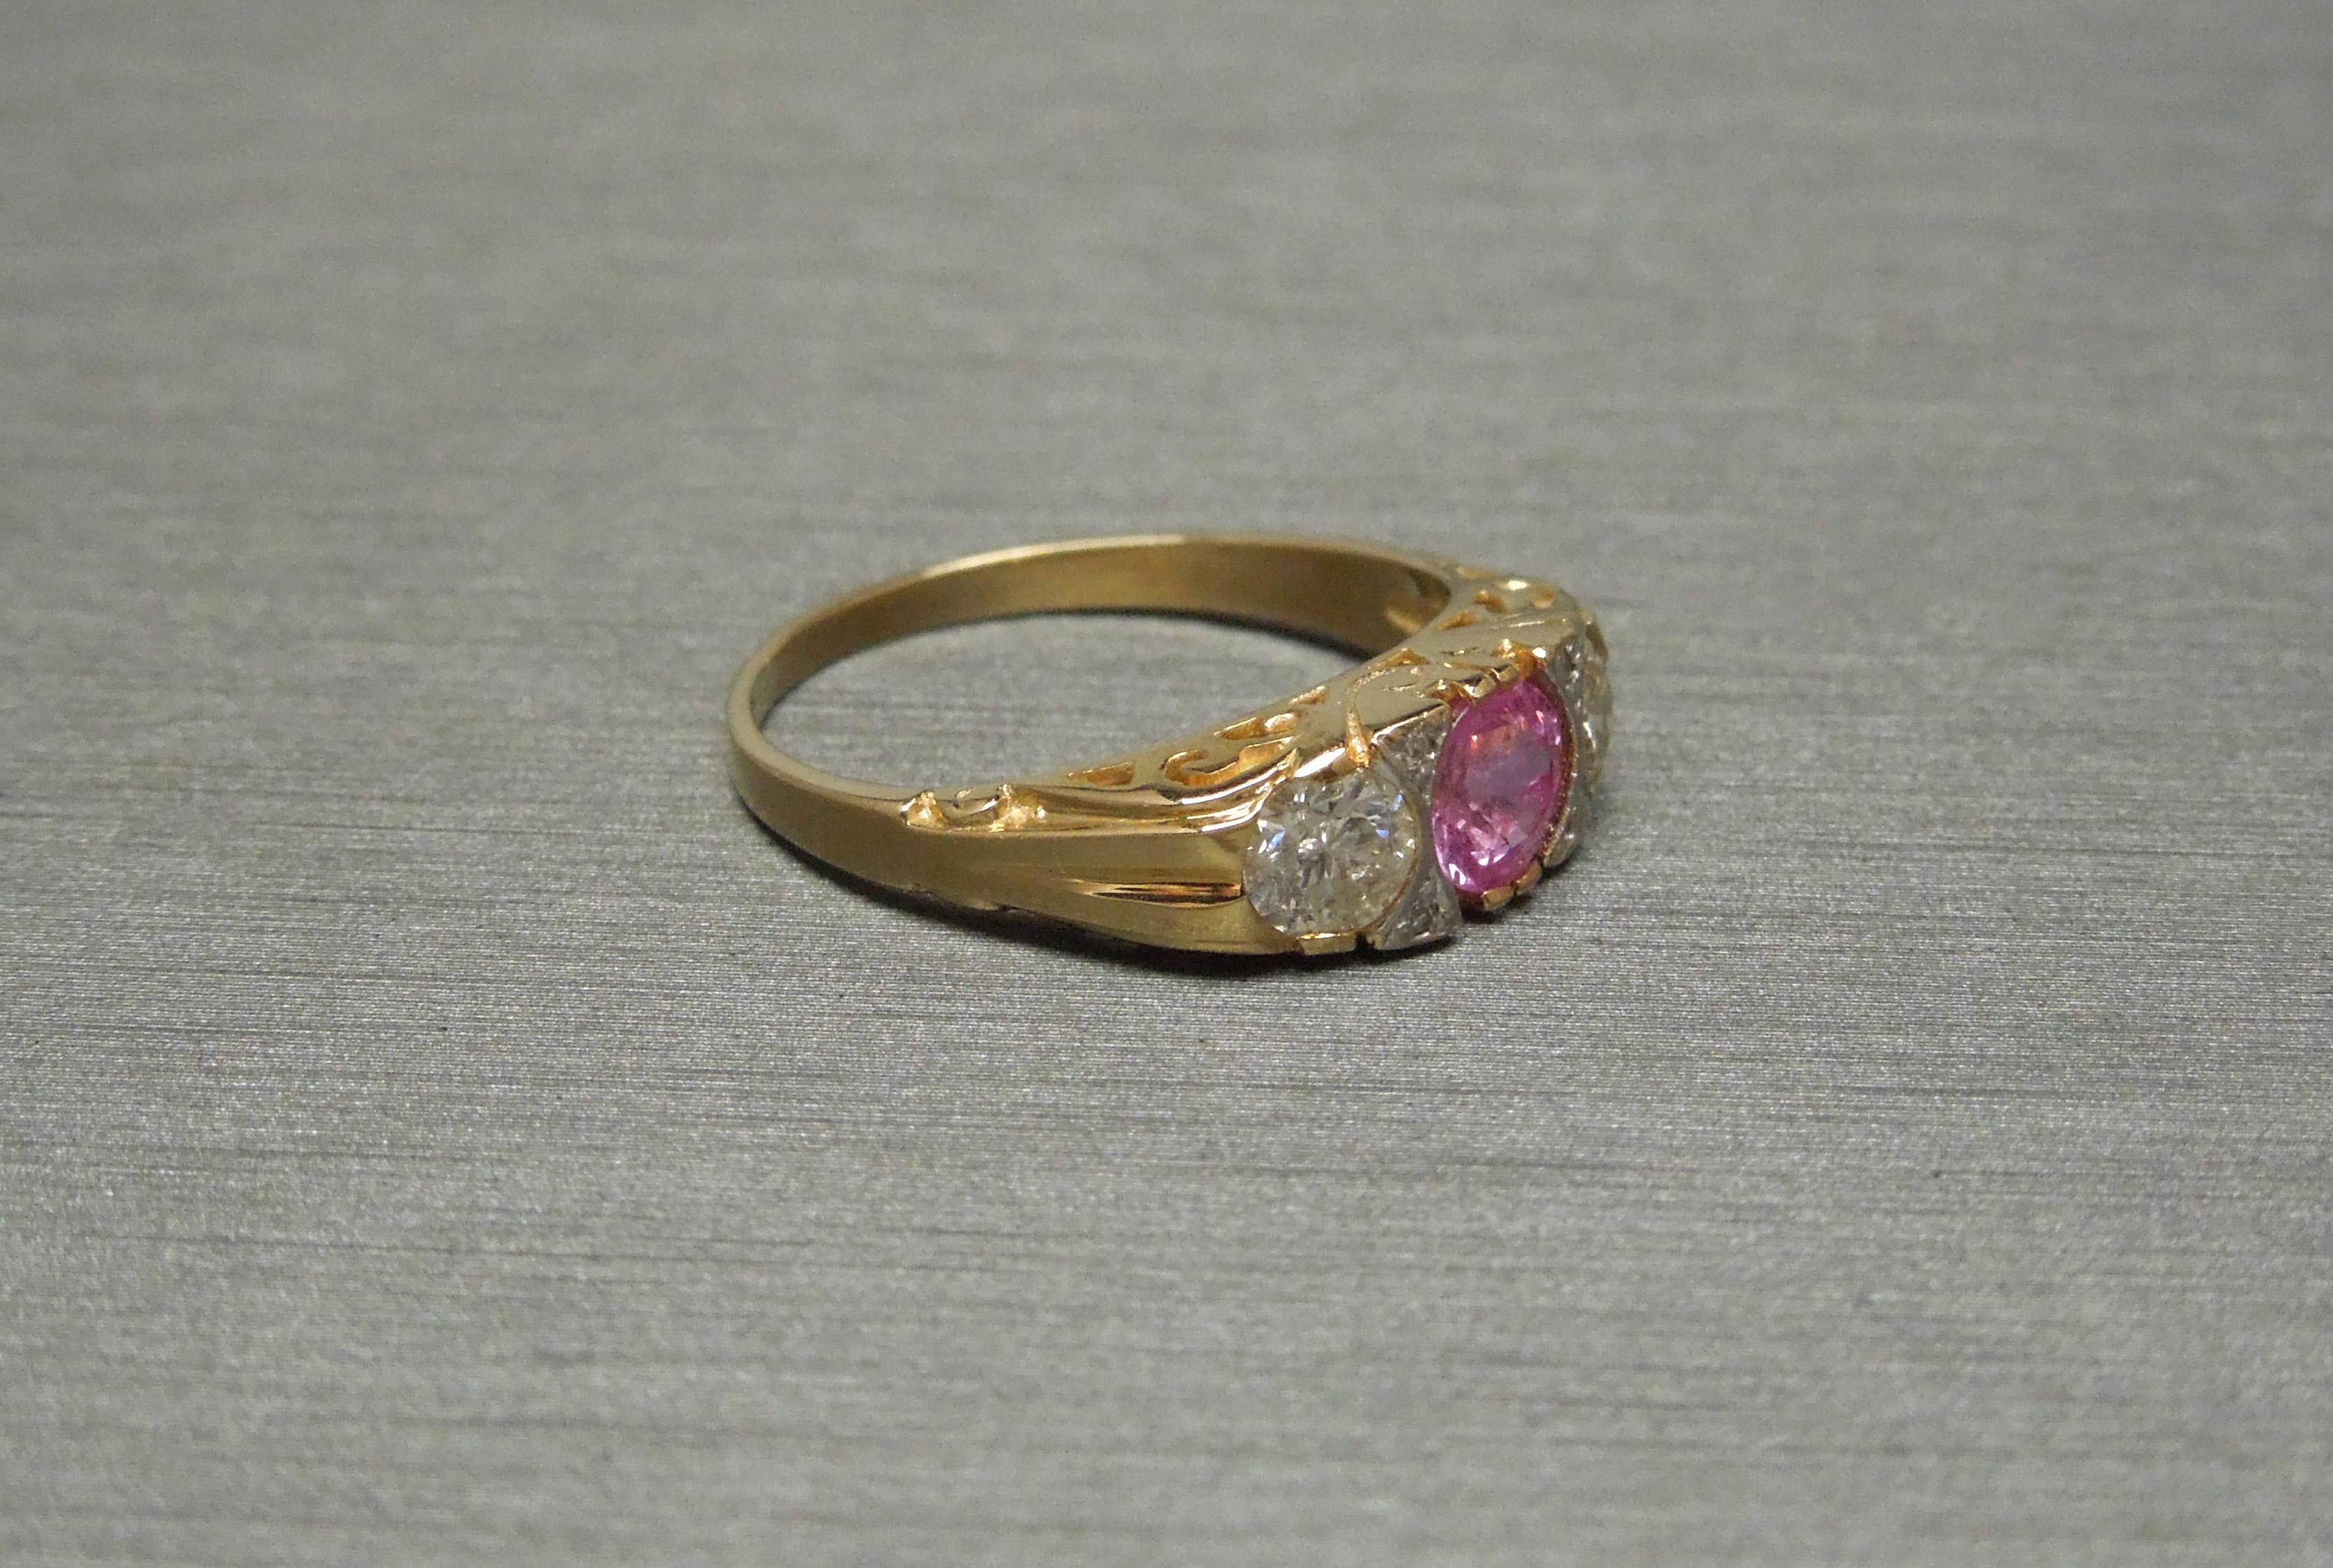 From a local New Orleans estate, this Victorian Pink Sapphire Trinity Ring features a central 0.68 carat Natural Intense Vivid Pink Sapphire at 4.7mm in diameter. Among the rarest colors of Sapphires in today's market, as well as Sapphire being the